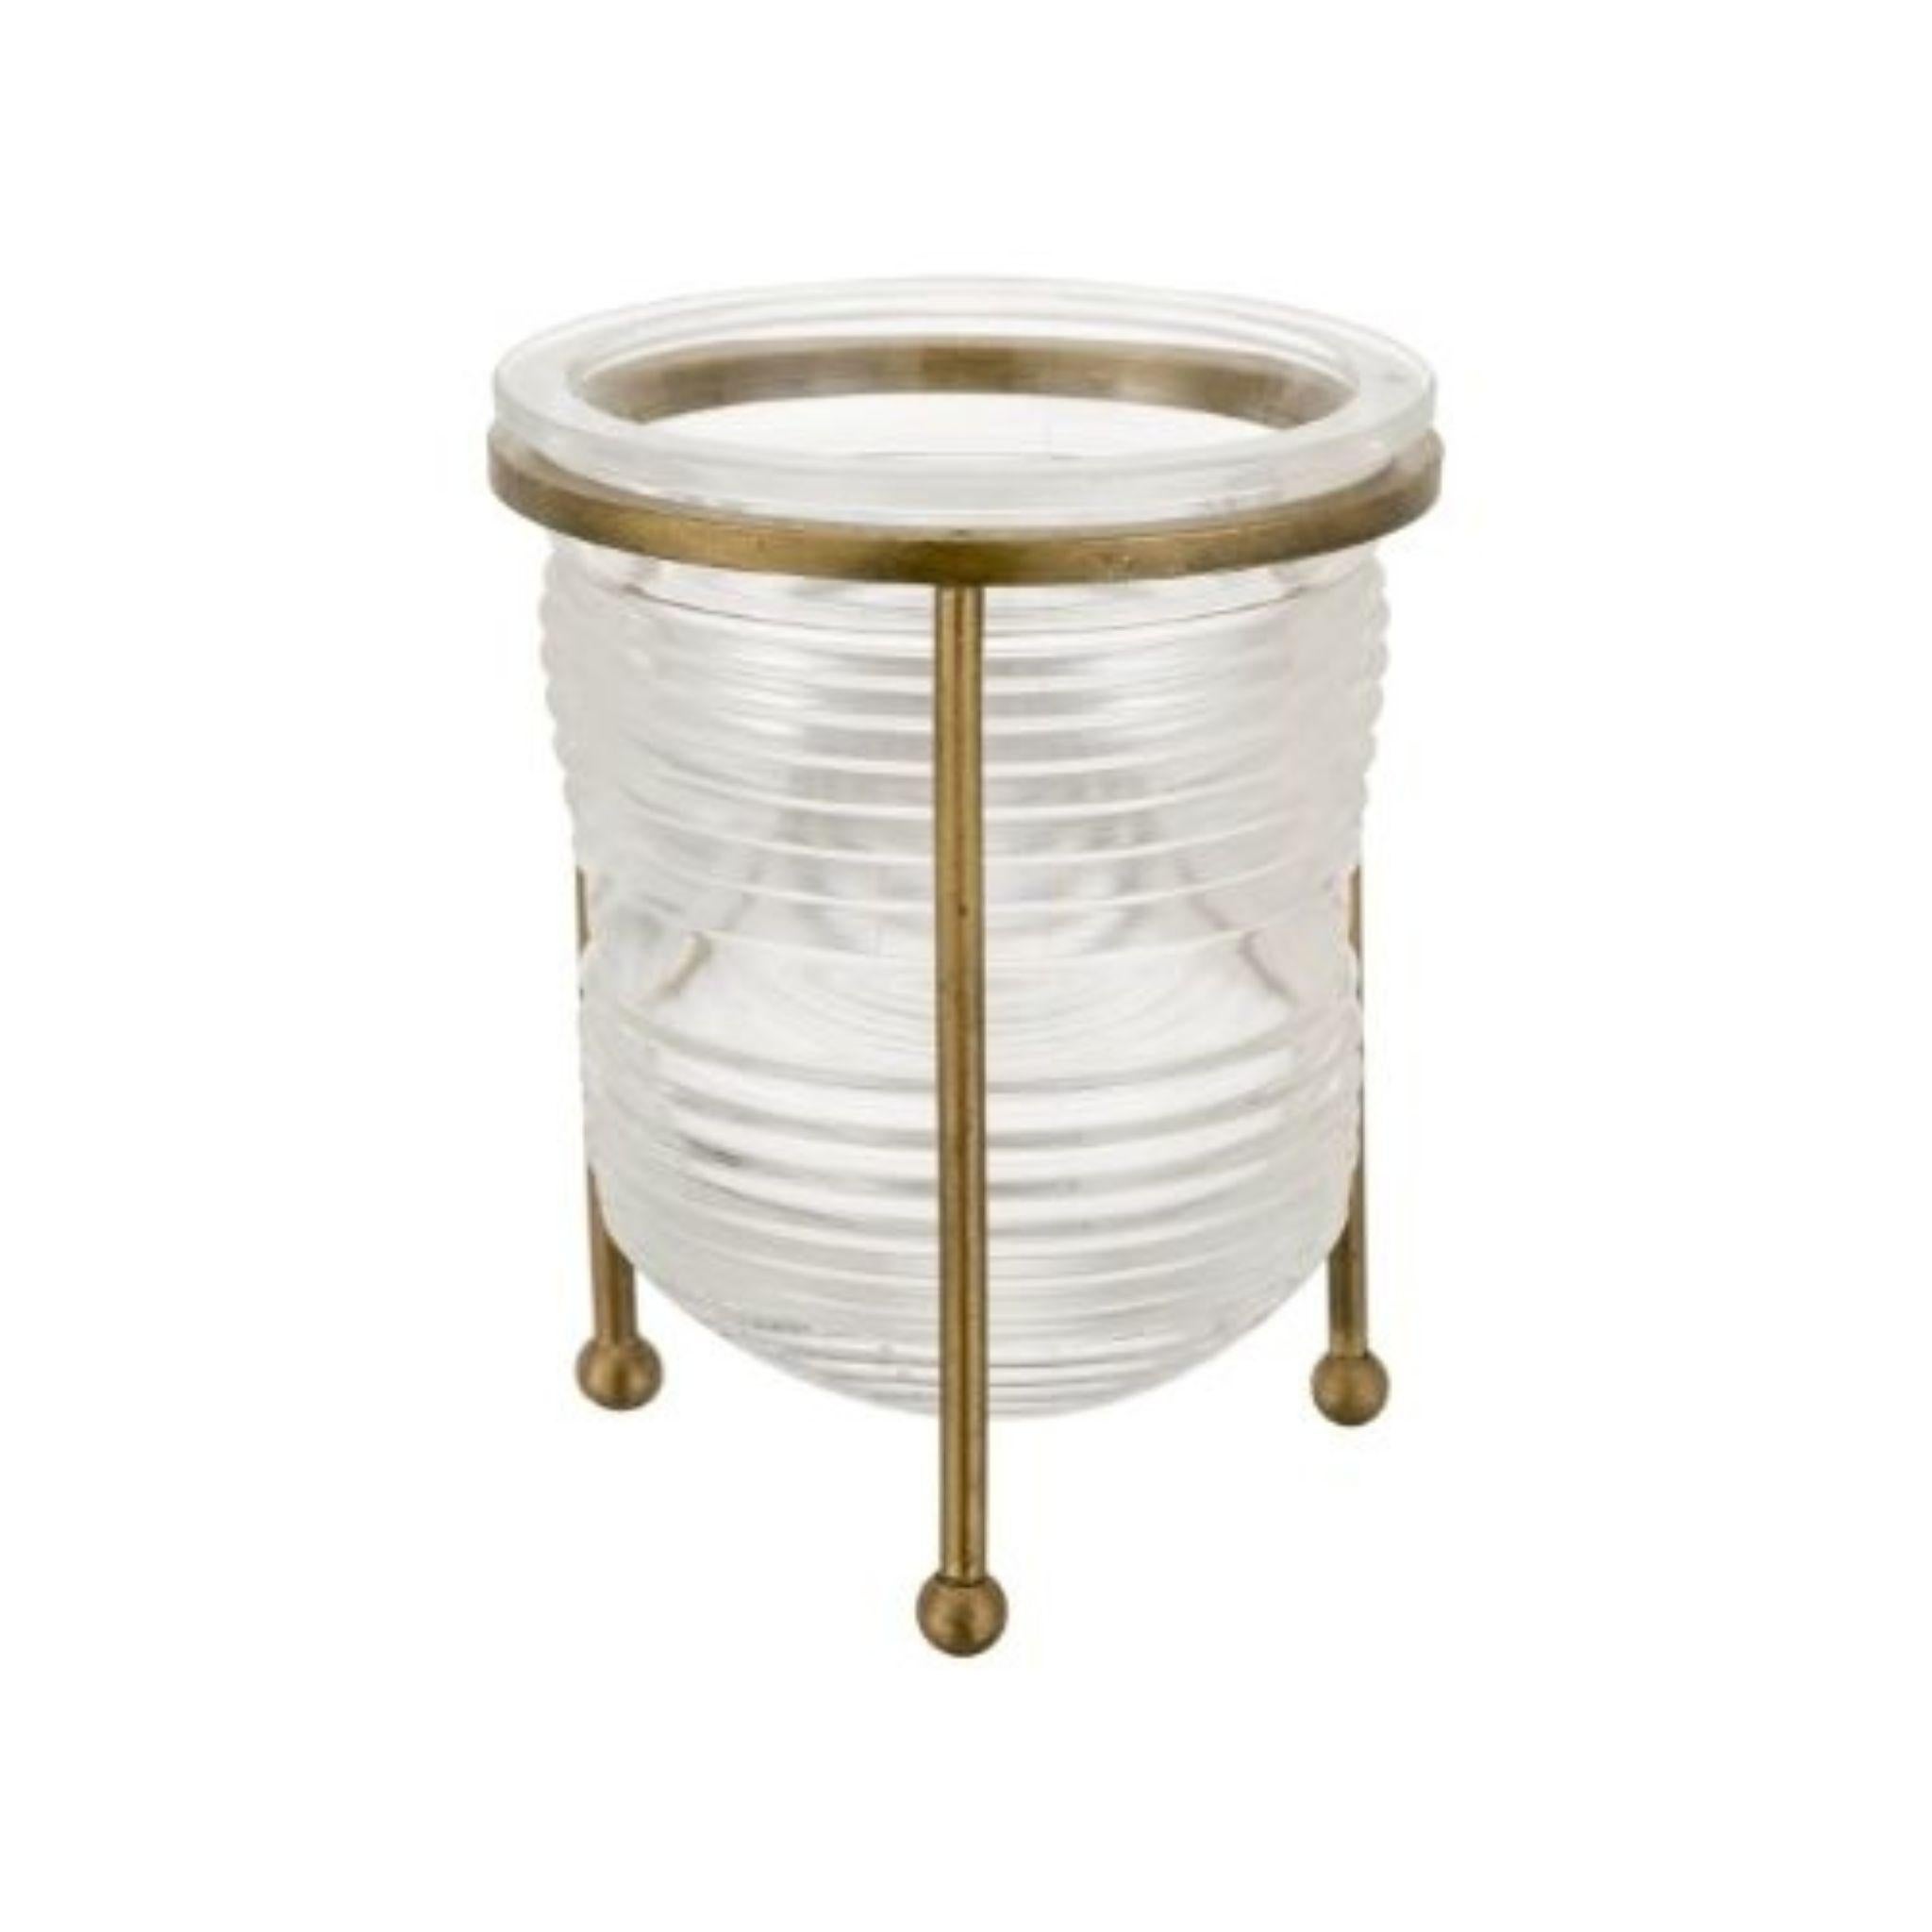 Add some sophistication and organization to your desk with our glass pen holder featuring a beautiful brass structure. Perfect for holding pens, pencils, and other small office supplies, this elegant accessory will elevate your workspace. Shop now